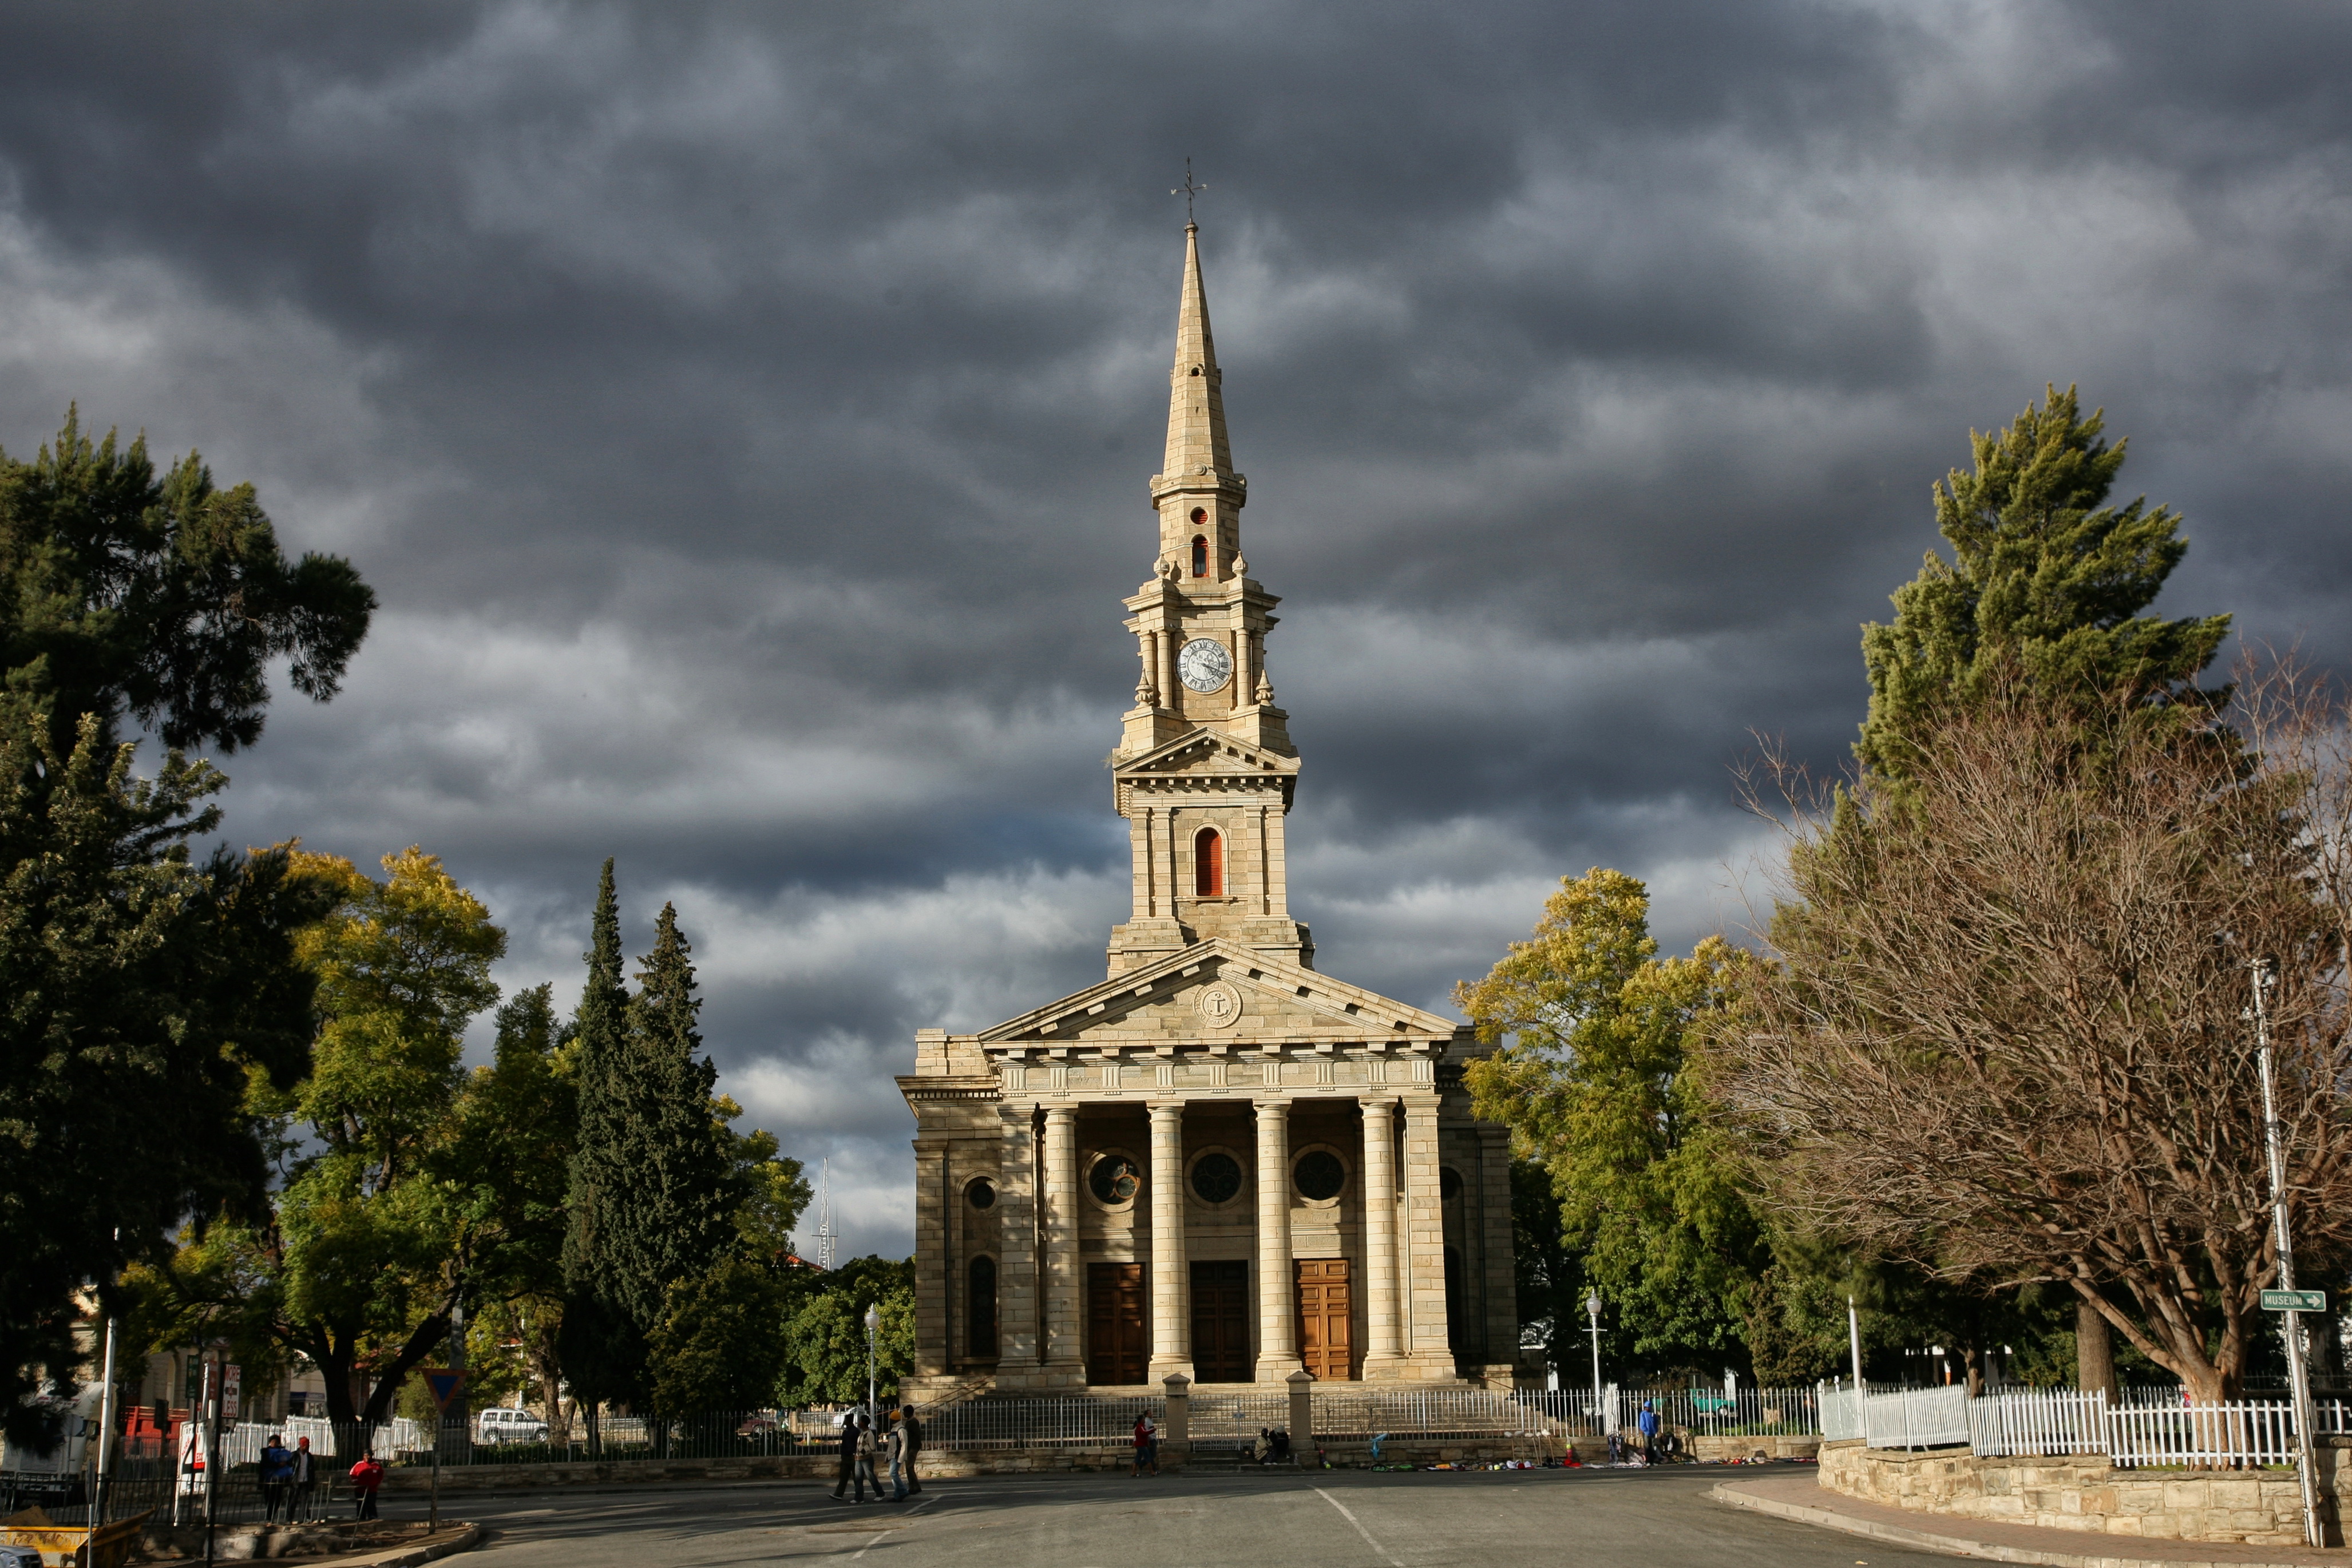 The Cradock Mother Church – British soldiers used the steeple as a watchtower. Image: Chris Marais